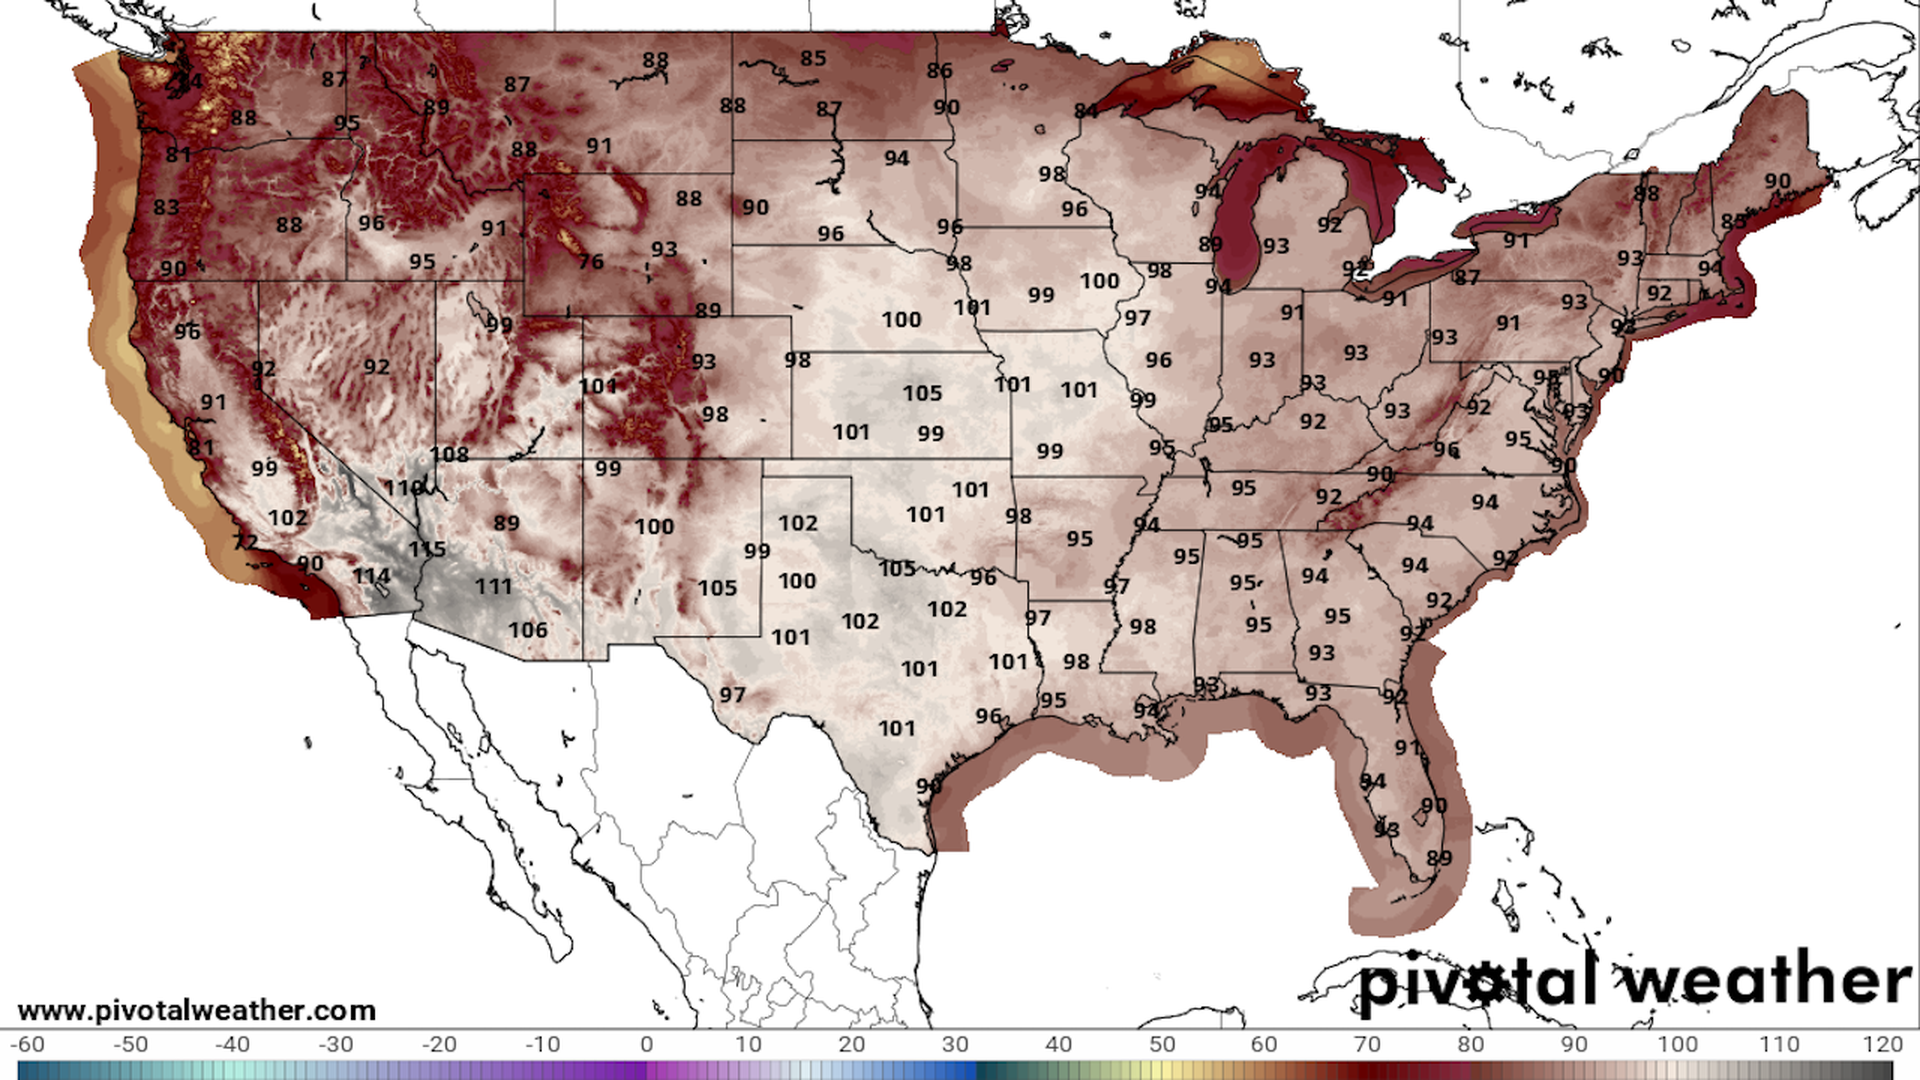 Temperature forecast for midweek this week, showing extreme heat across much of the Lower 48 states.